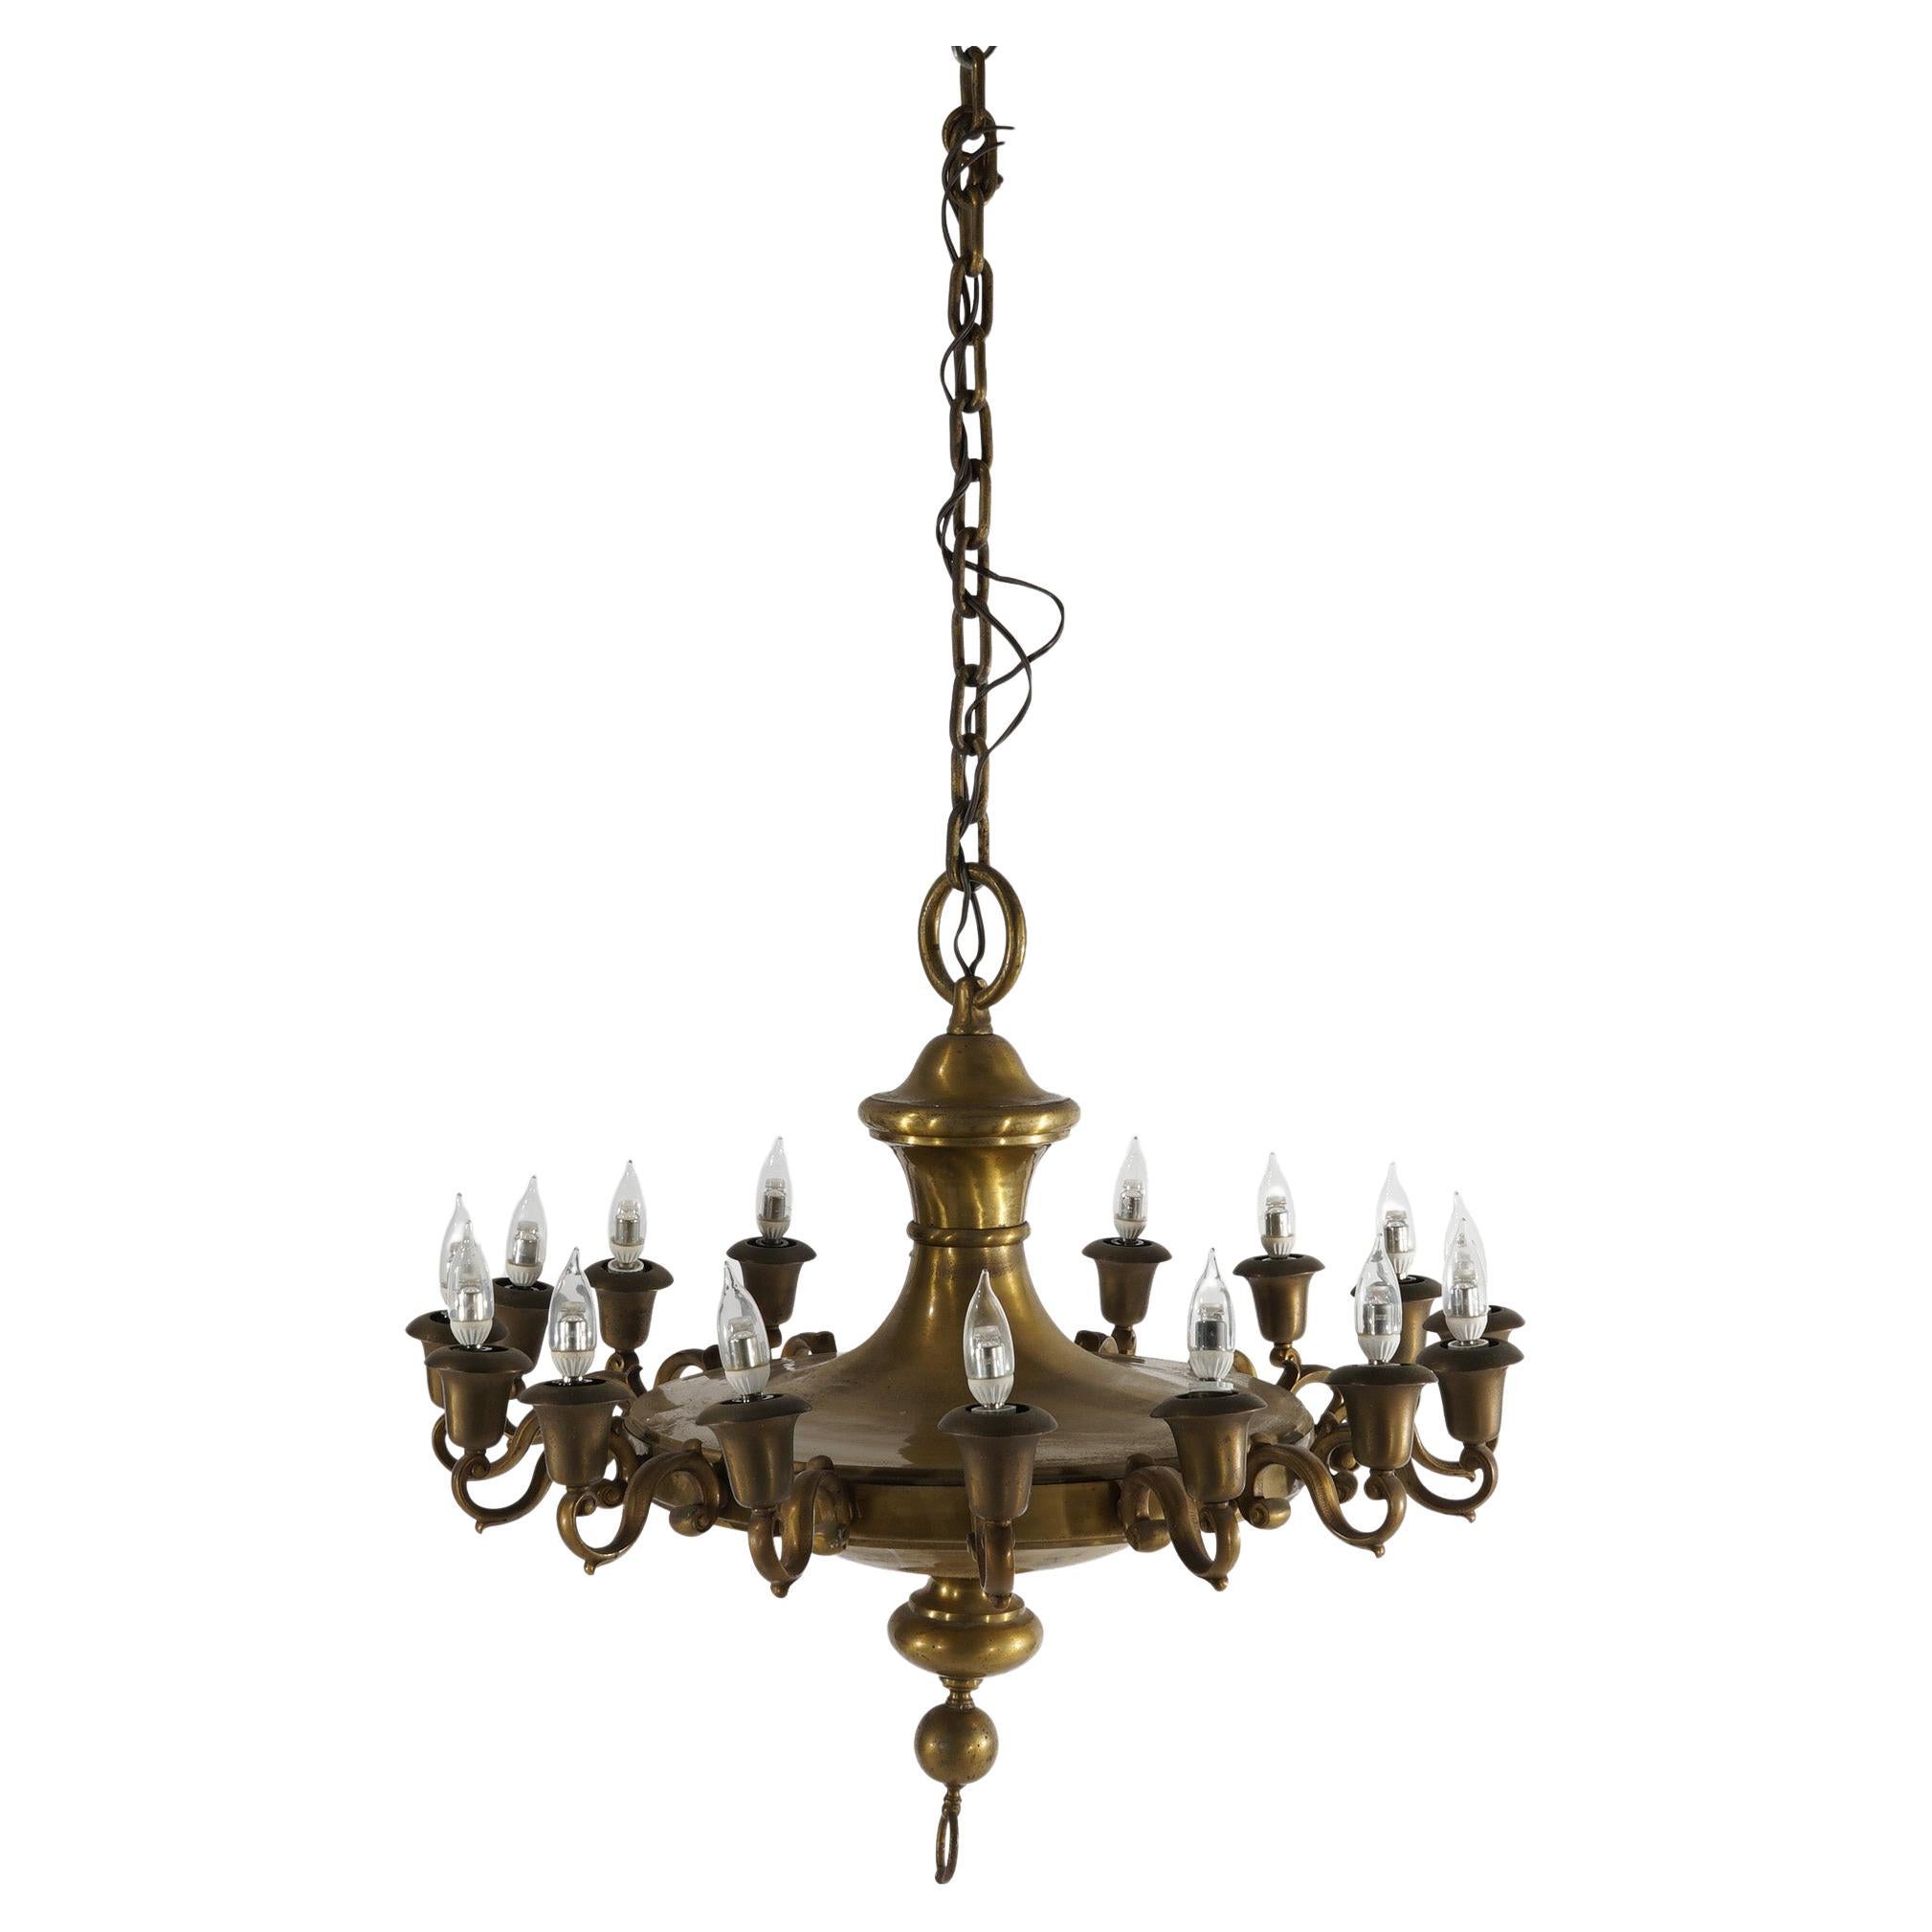 Antique Oversized French Empire Style Brass  16-Light Pan Chandelier, 20th C